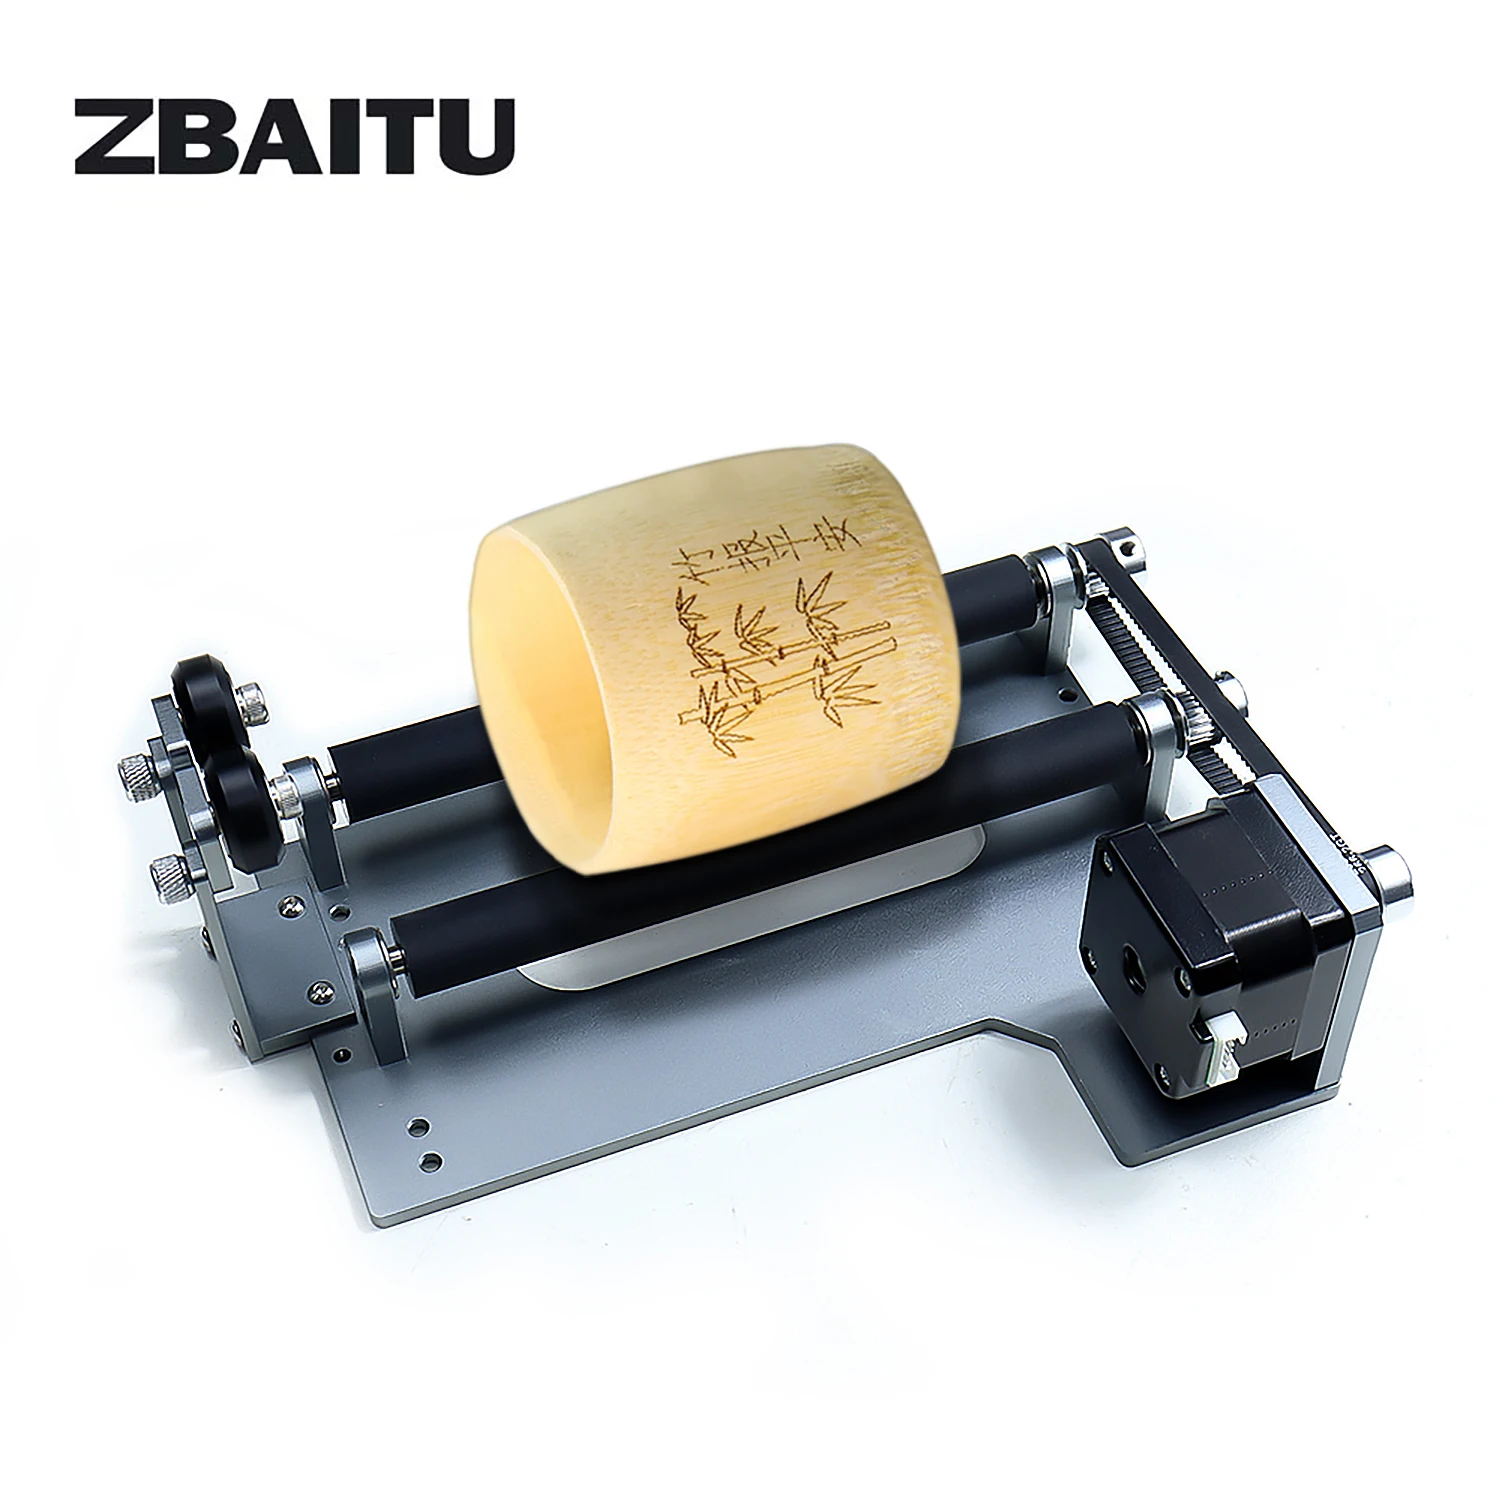 CNC Y-axis Laser Rotary Roller Wood Cutting Laser Engraver Engraving Module For DIY Cylindrical Objects Cans 360 Degree Rotating enlarge